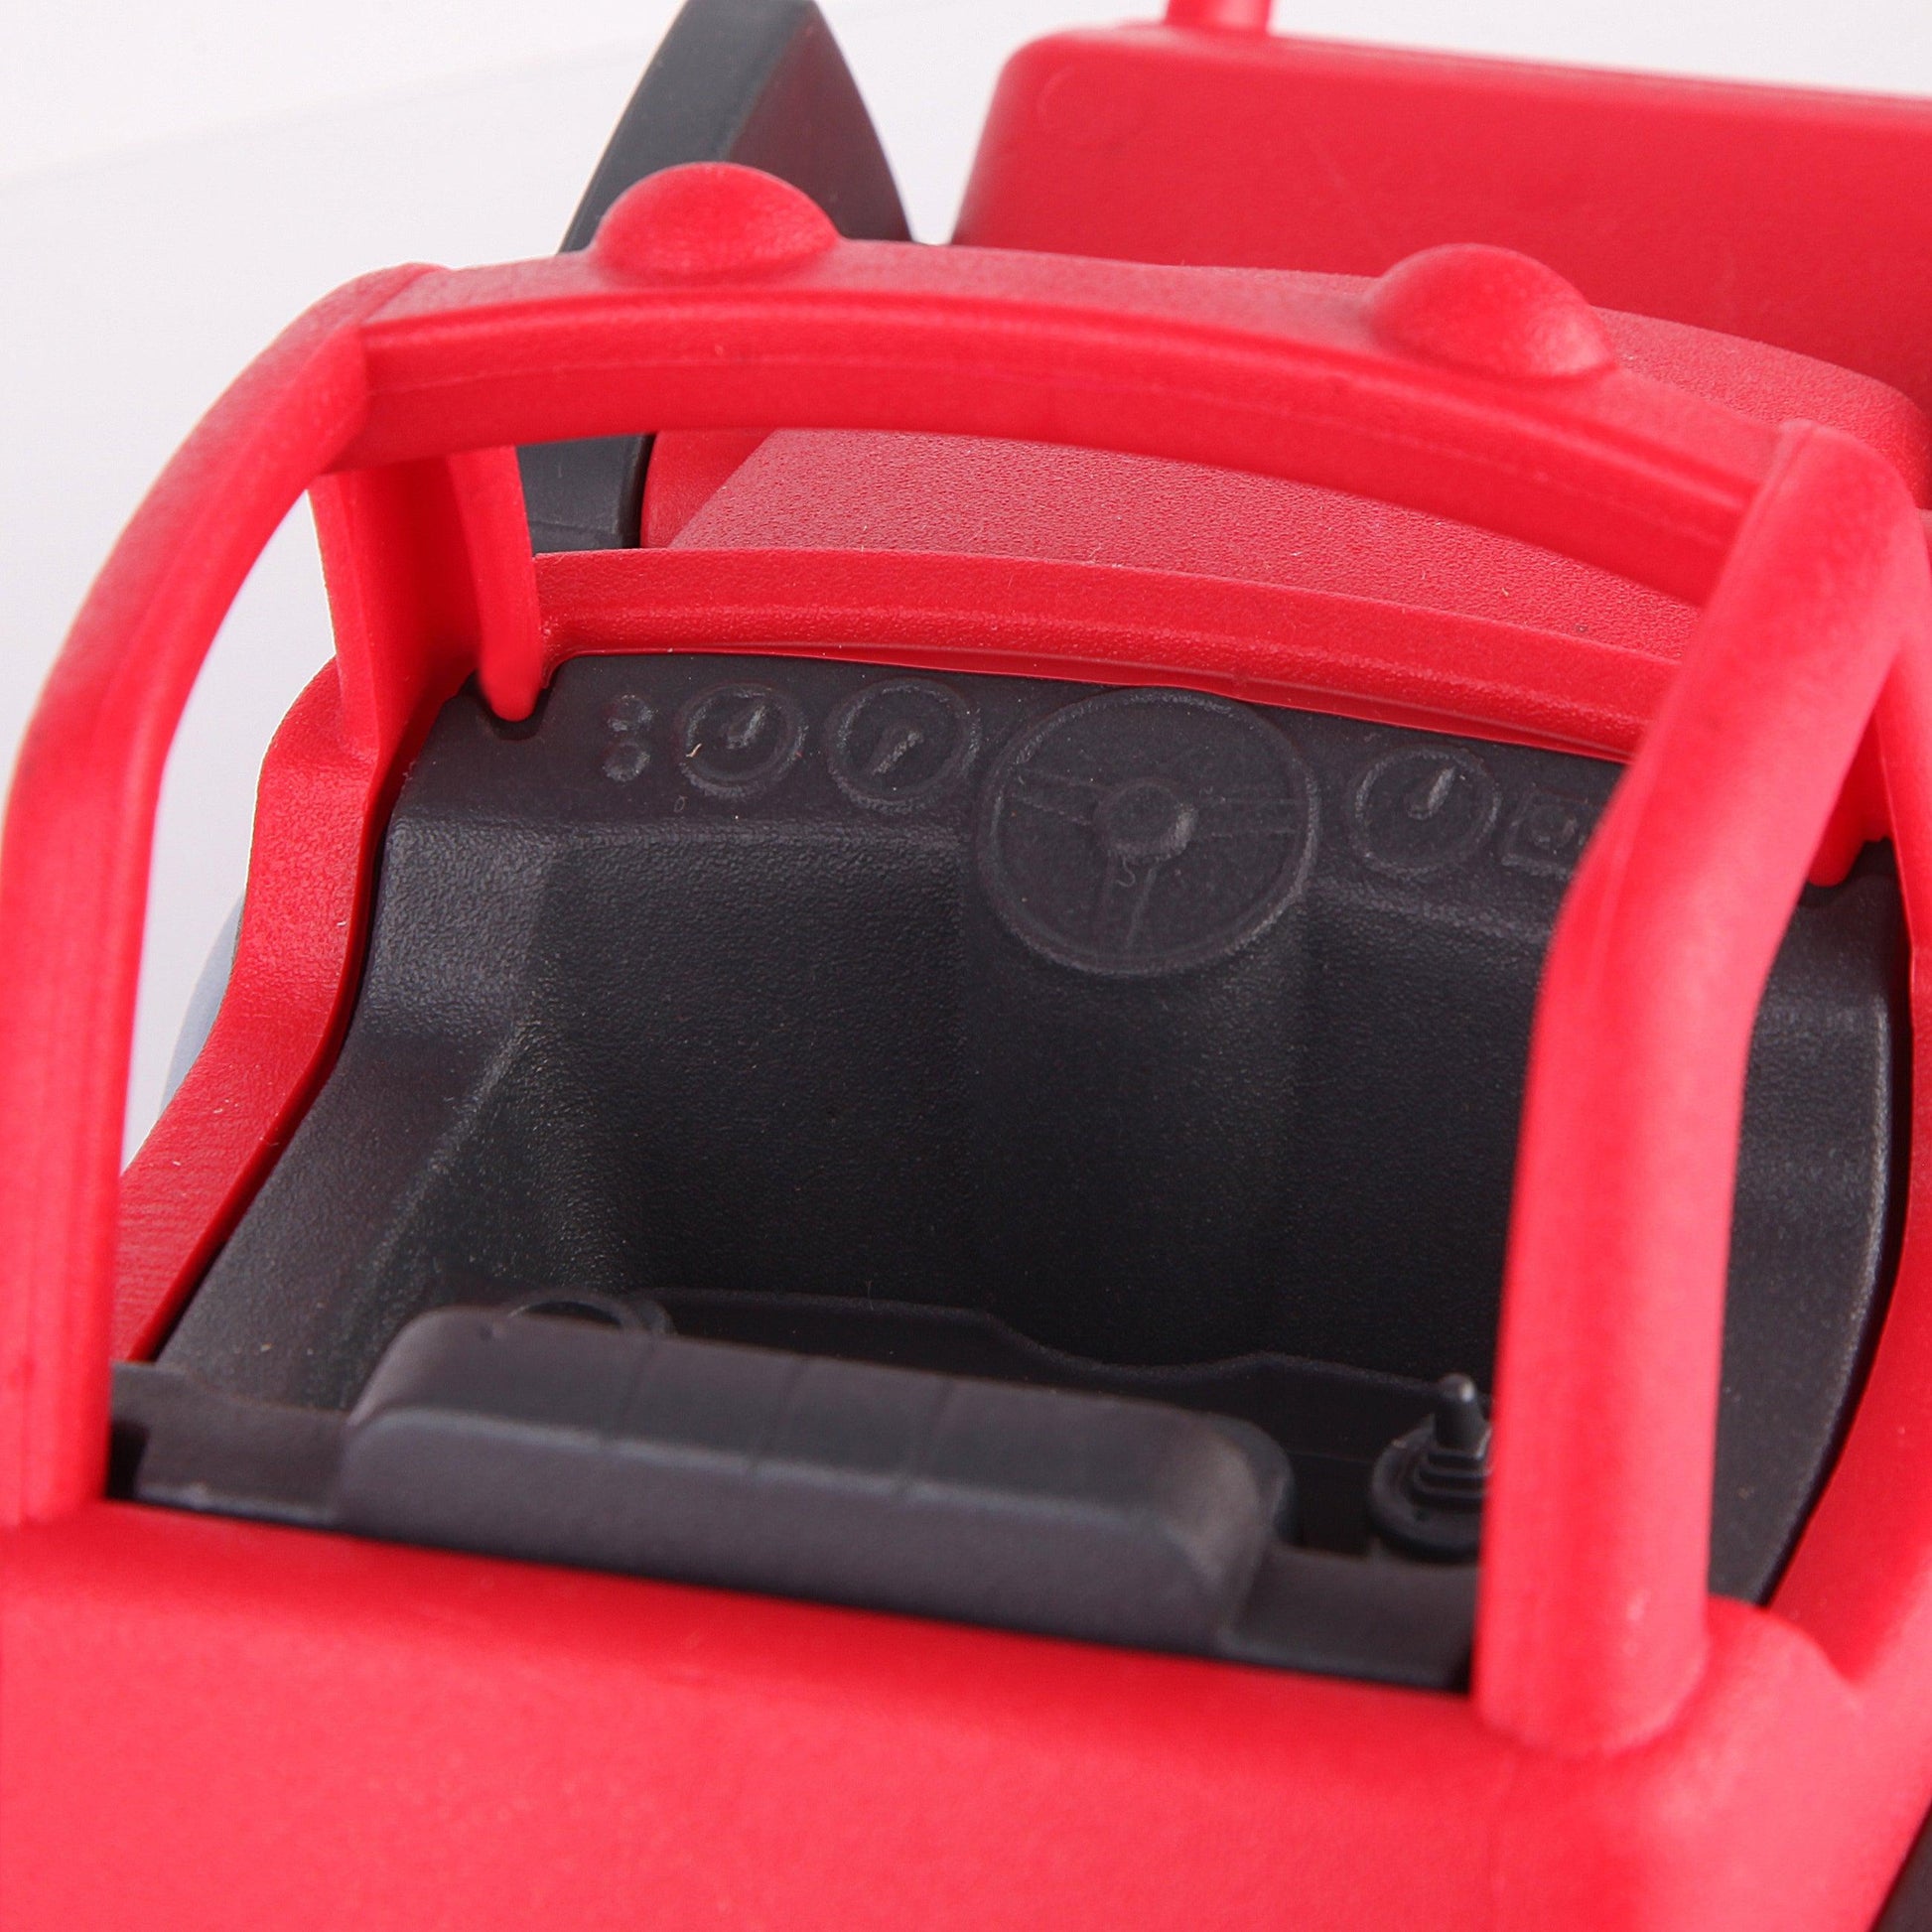 Red Mini Loader-Car, catveh, Communication, Coordination, Imagination, Language, Loader, Motor, Pretend, Red, Skills, Toy, Tractor, Truck, Wheels-Let's Be Child-[Too Twee]-[Tootwee]-[baby]-[newborn]-[clothes]-[essentials]-[toys]-[Lebanon]